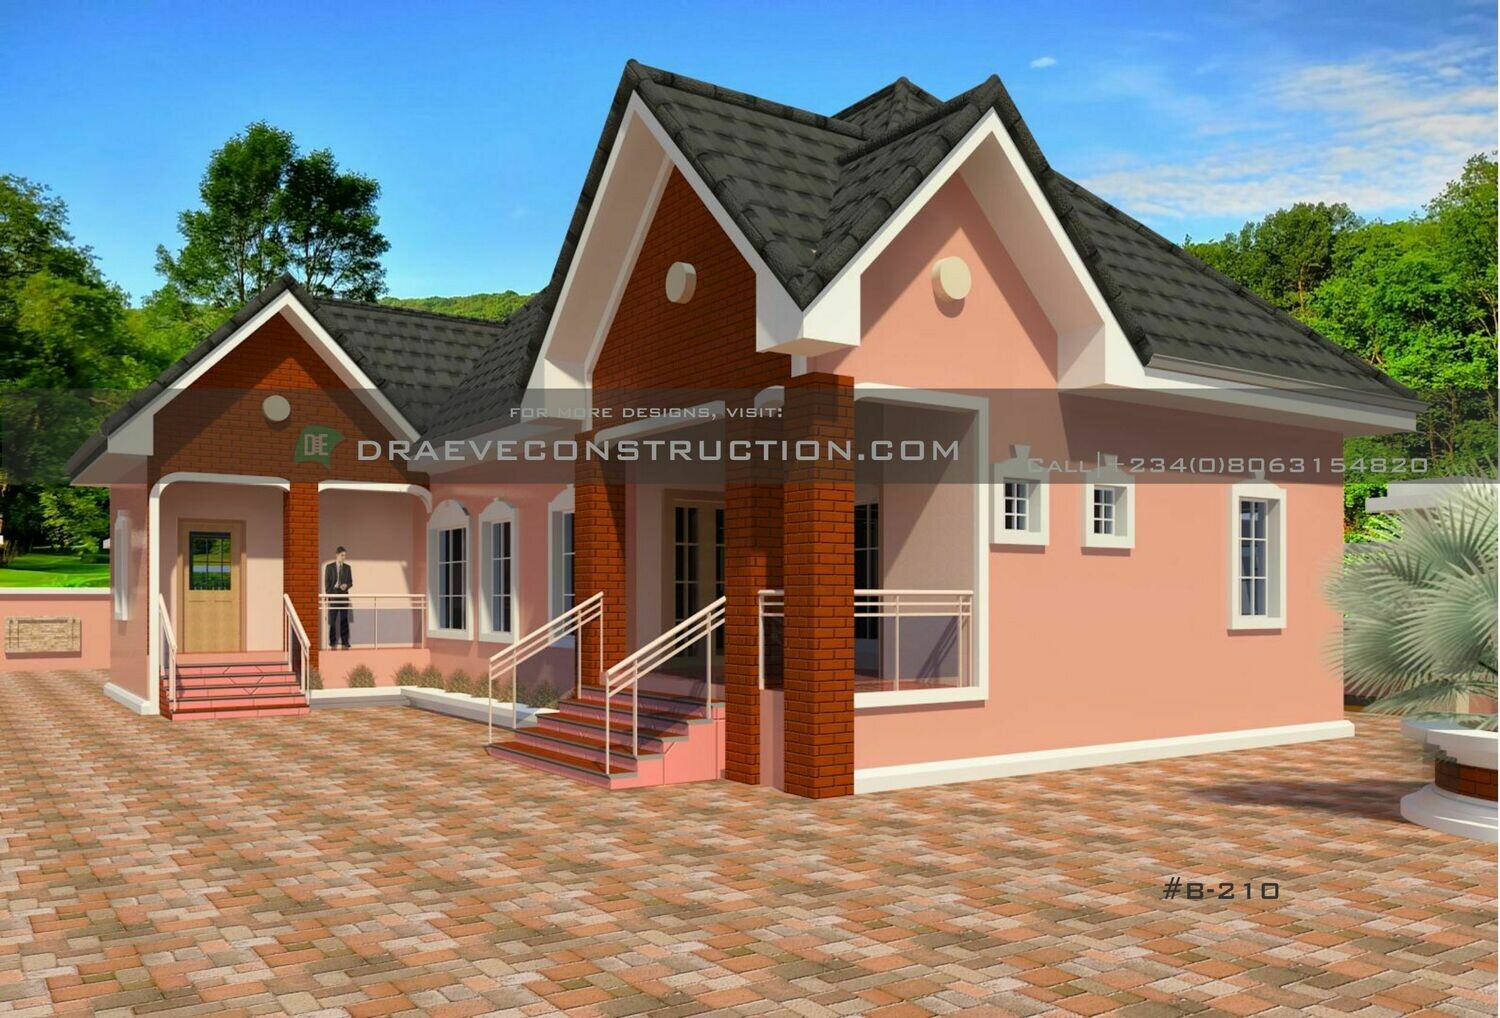 3 Bedroom Bungalow with Selfcontain Floorplan and Key Construction